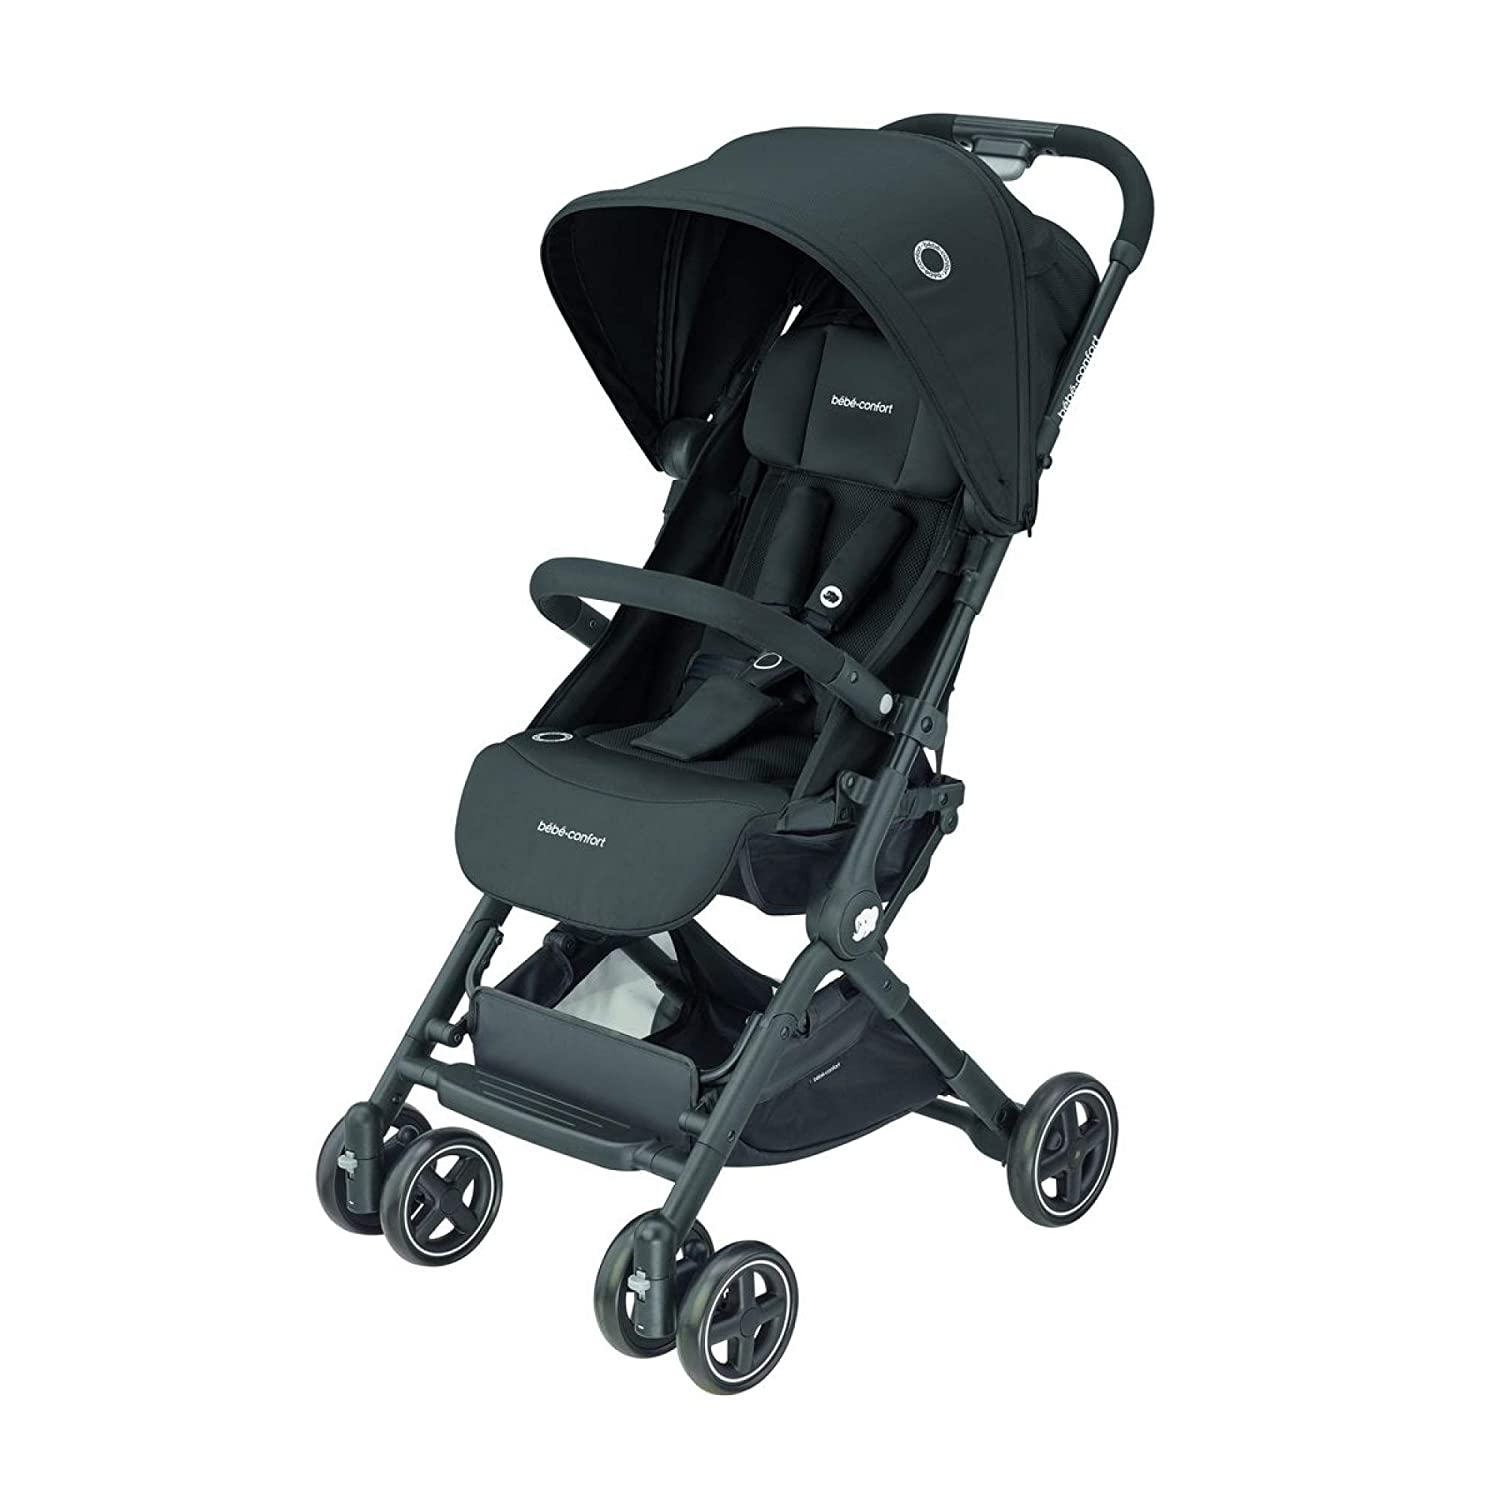 Bébé Confort Lara2 Travel Pushchair Lightweight and Compact Tilt and Folding with Automatic Closure Approved up to 22 kg from Birth to 4 Years [Essential Black]